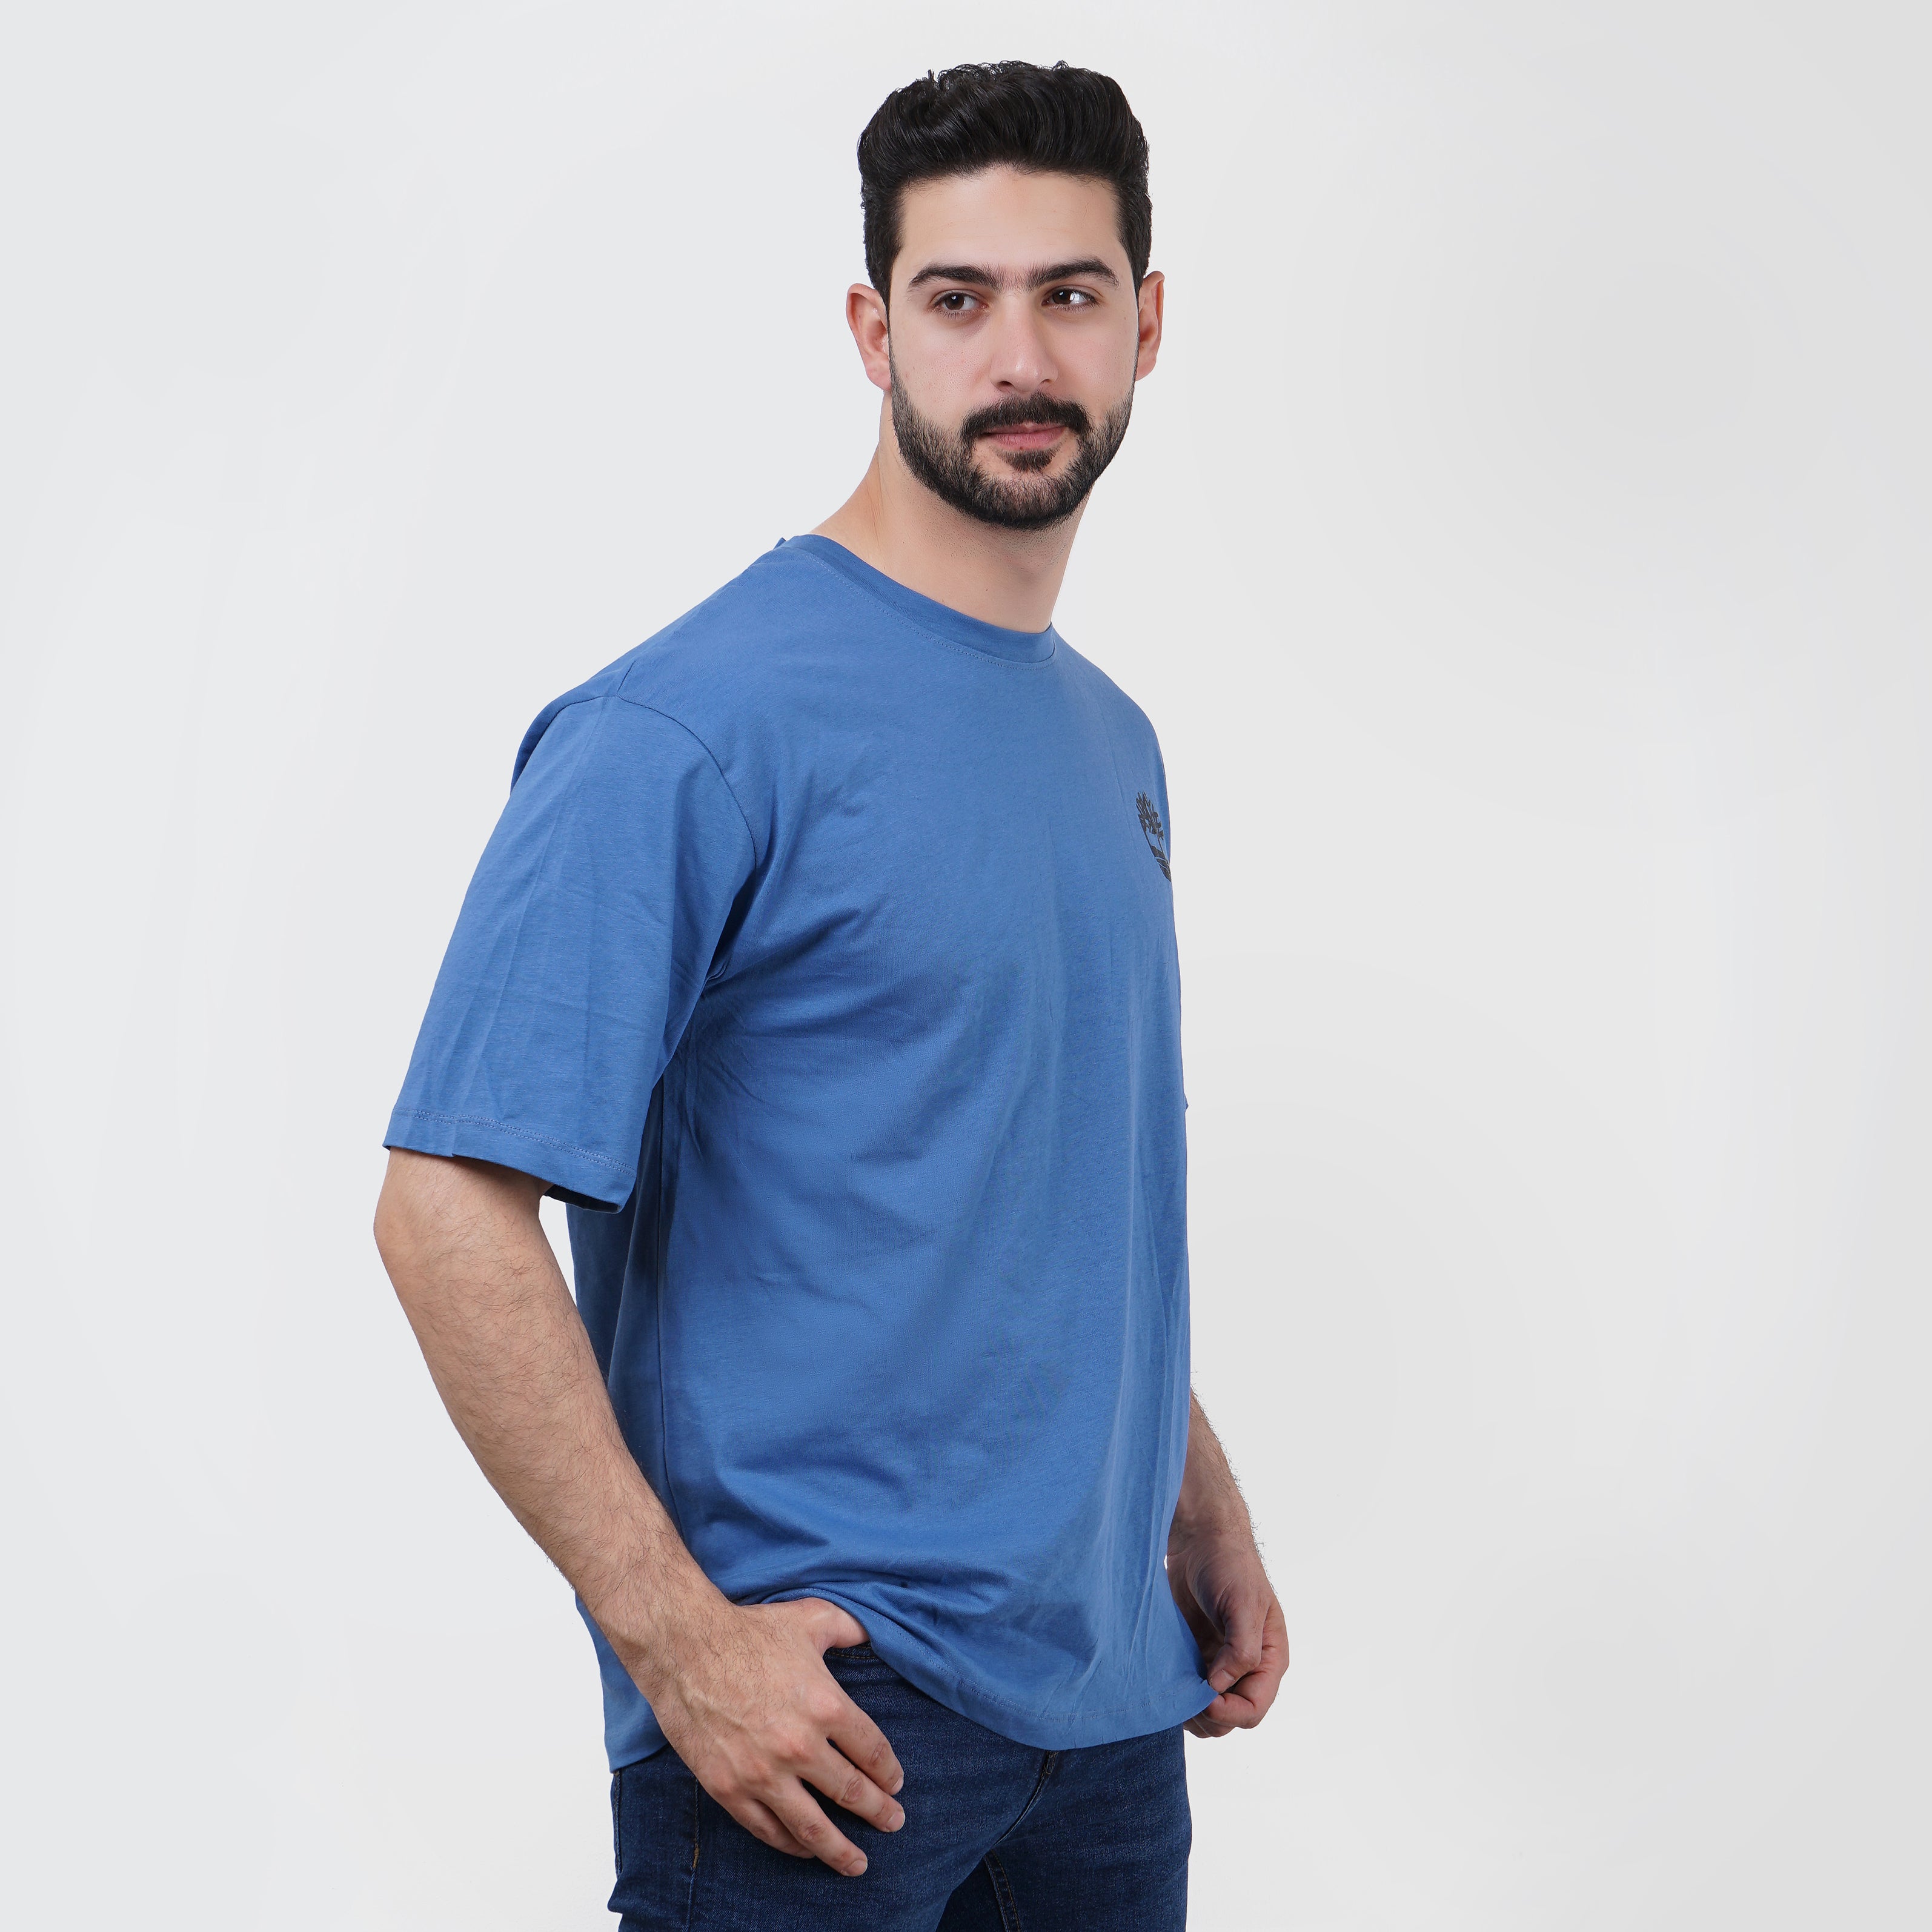 Man in blue Timberland t-shirt looking at camera on a white background.